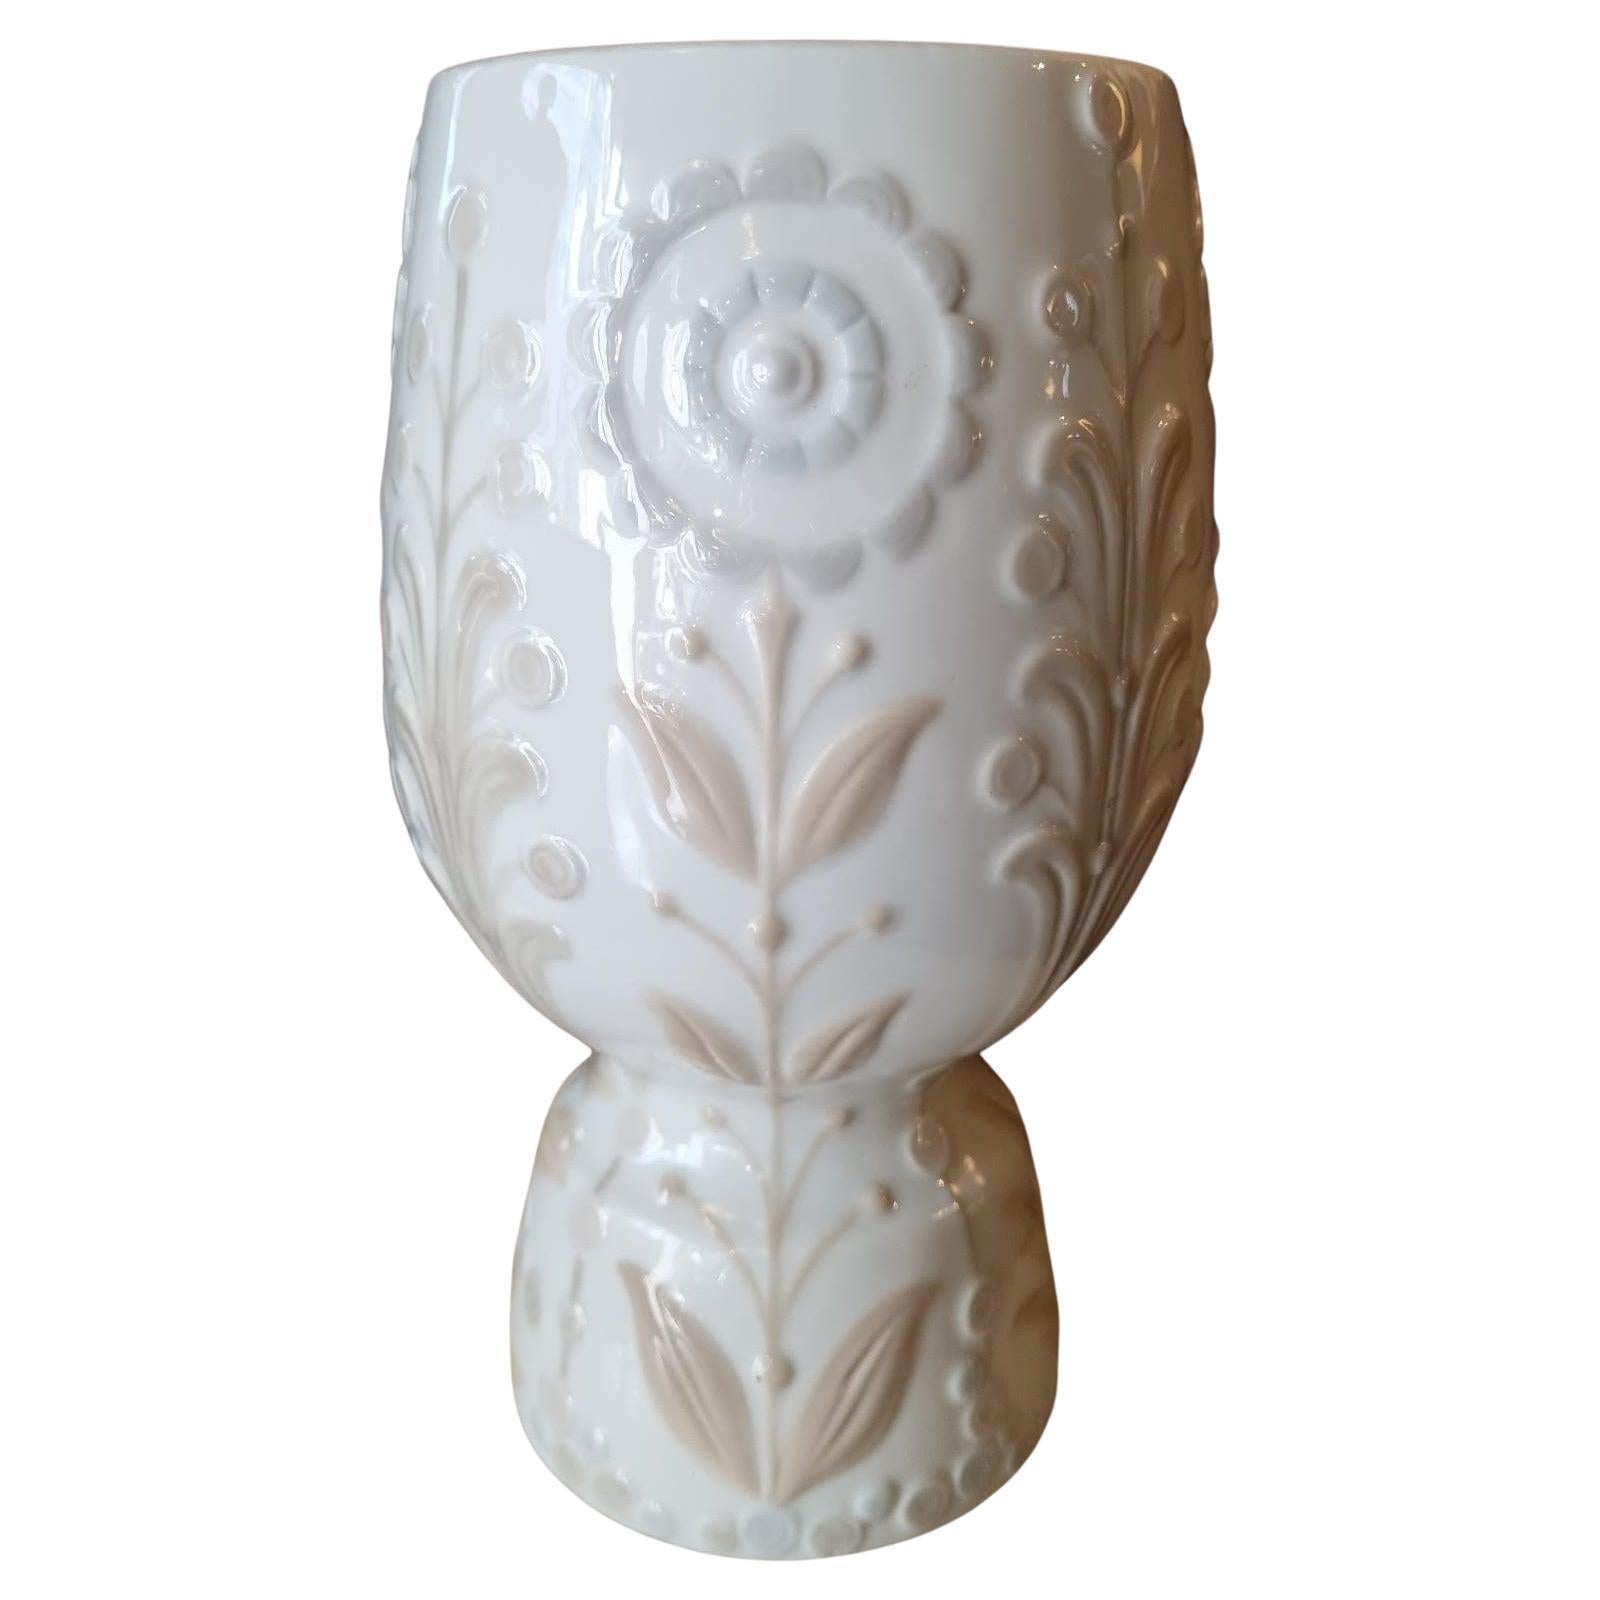 A beautiful porcelain floral vase designed by Julio Fernández and manufactured by Lladró. Spain, 1970s.
This elegant glazed porcelain vase has a clean design with floral and foliage decorations in pastel colors.
Mint condition.
It has the mark of